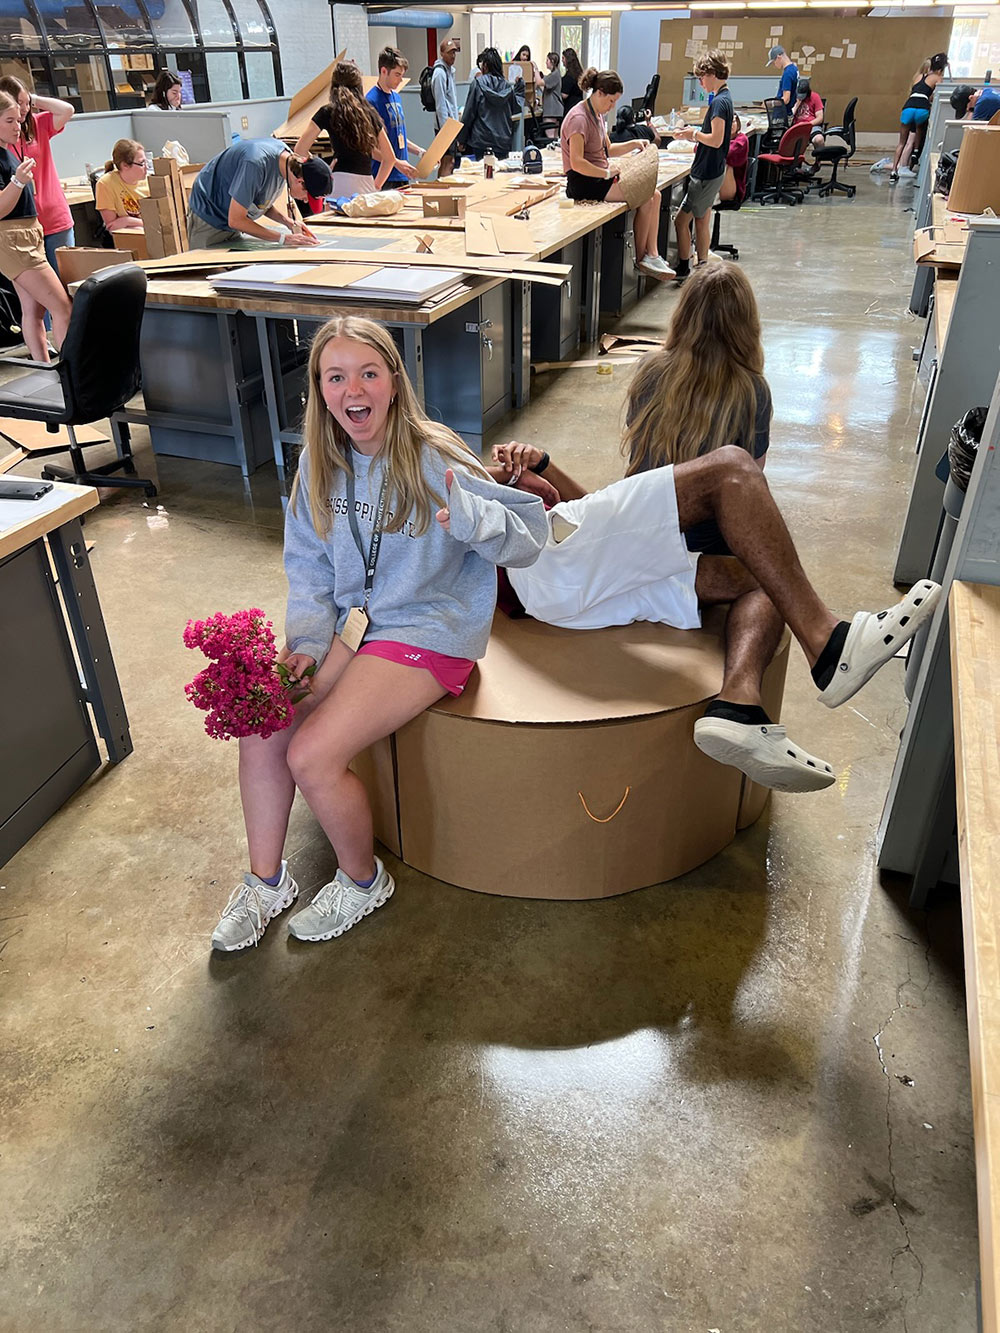 Design Discovery campers sit and lay down on their cardboard chair project in Barn.